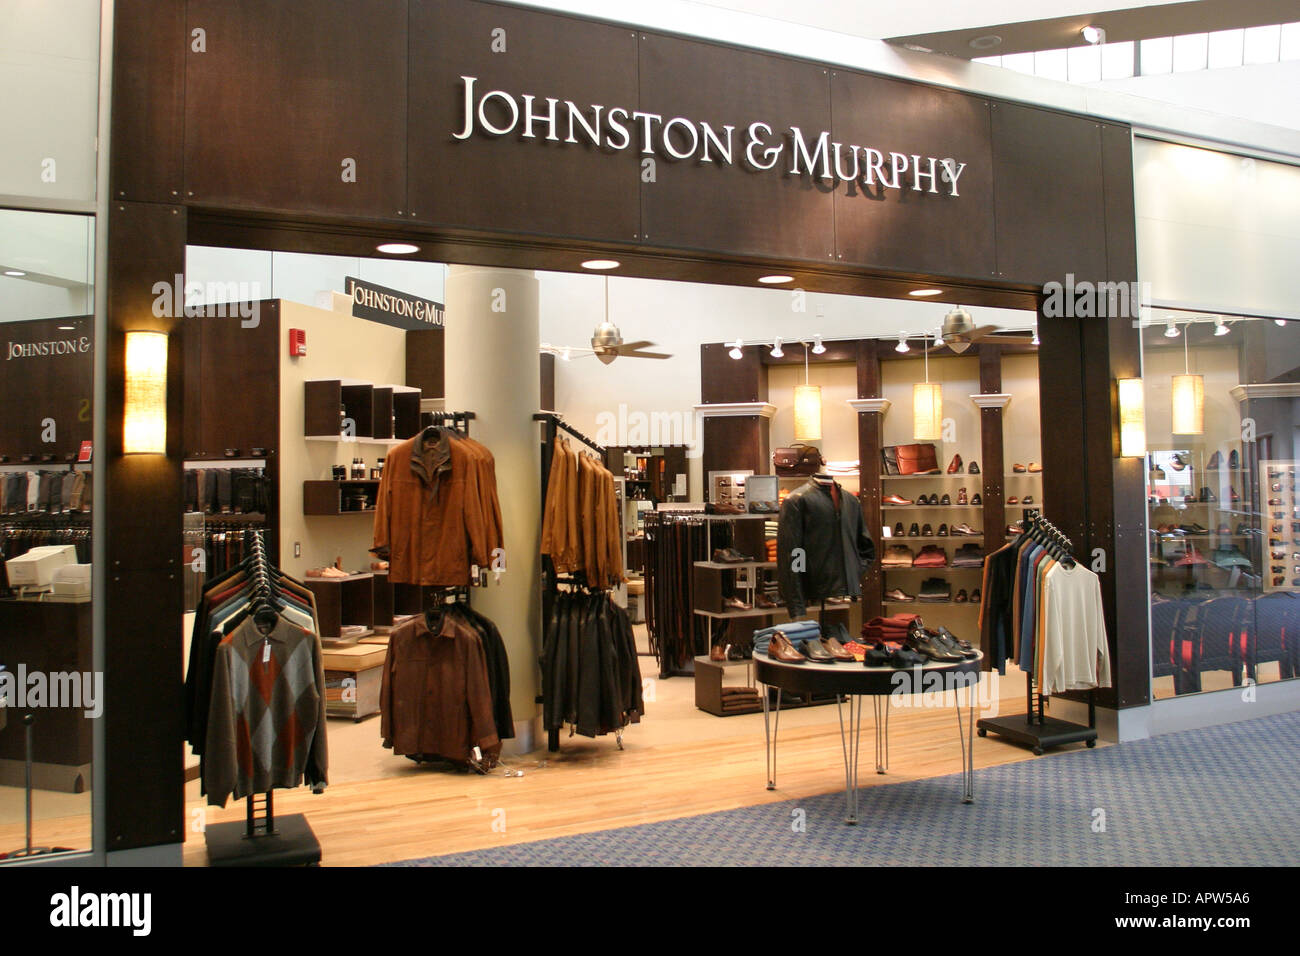 Johnston and murphy clothing / Word for 